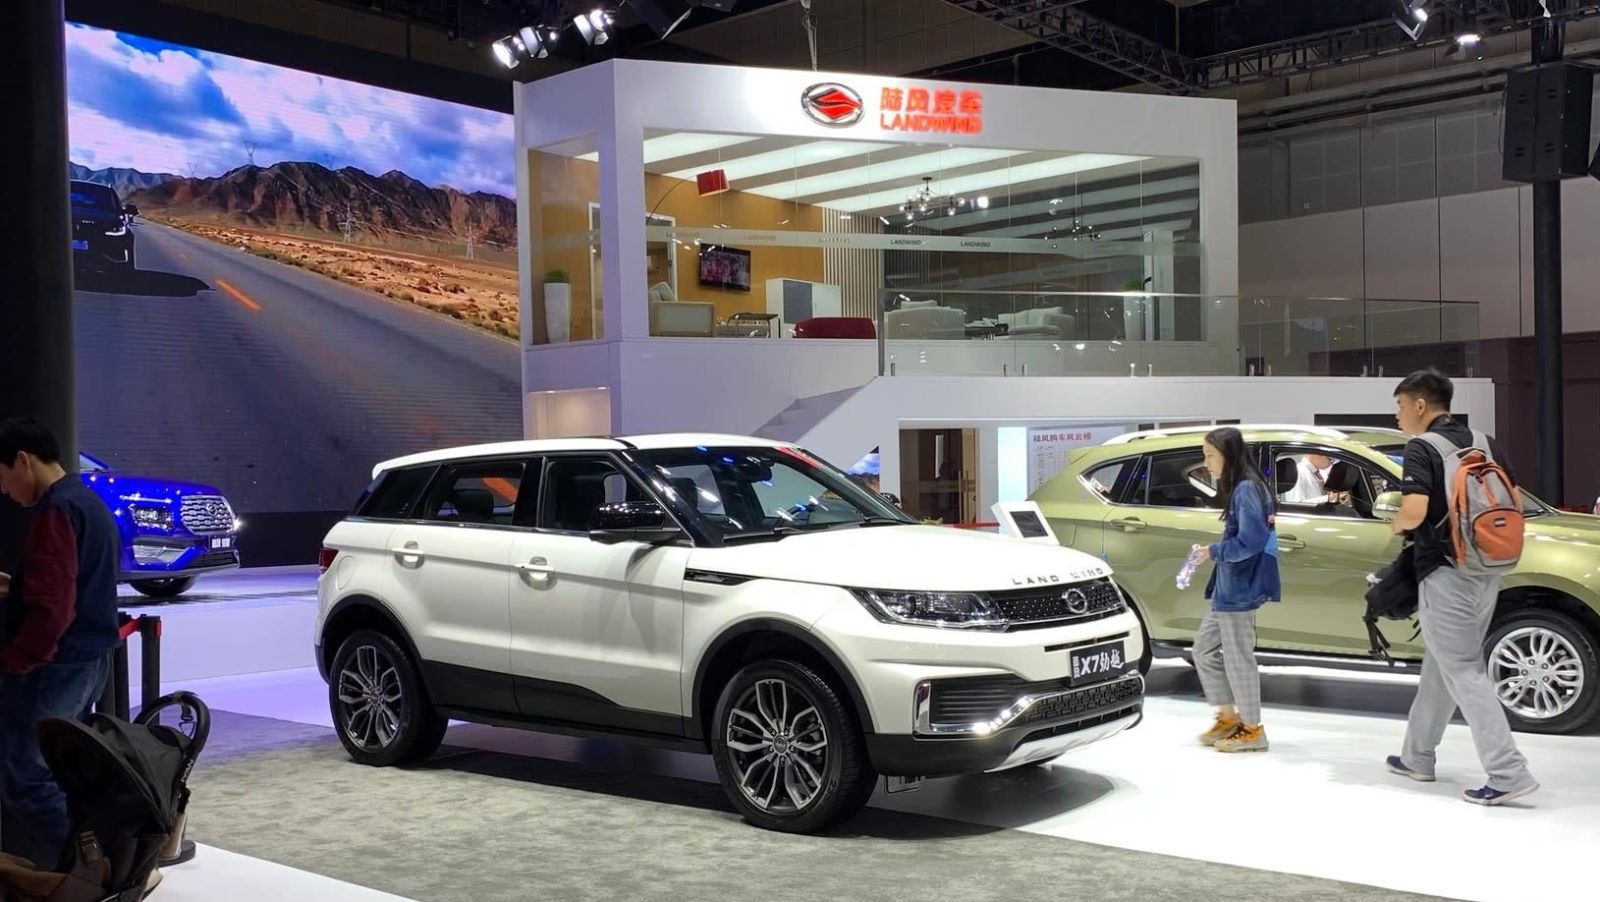 Illustration for article titled Banned Landwind X7 Displayed at 2019 Shanghai Auto Show